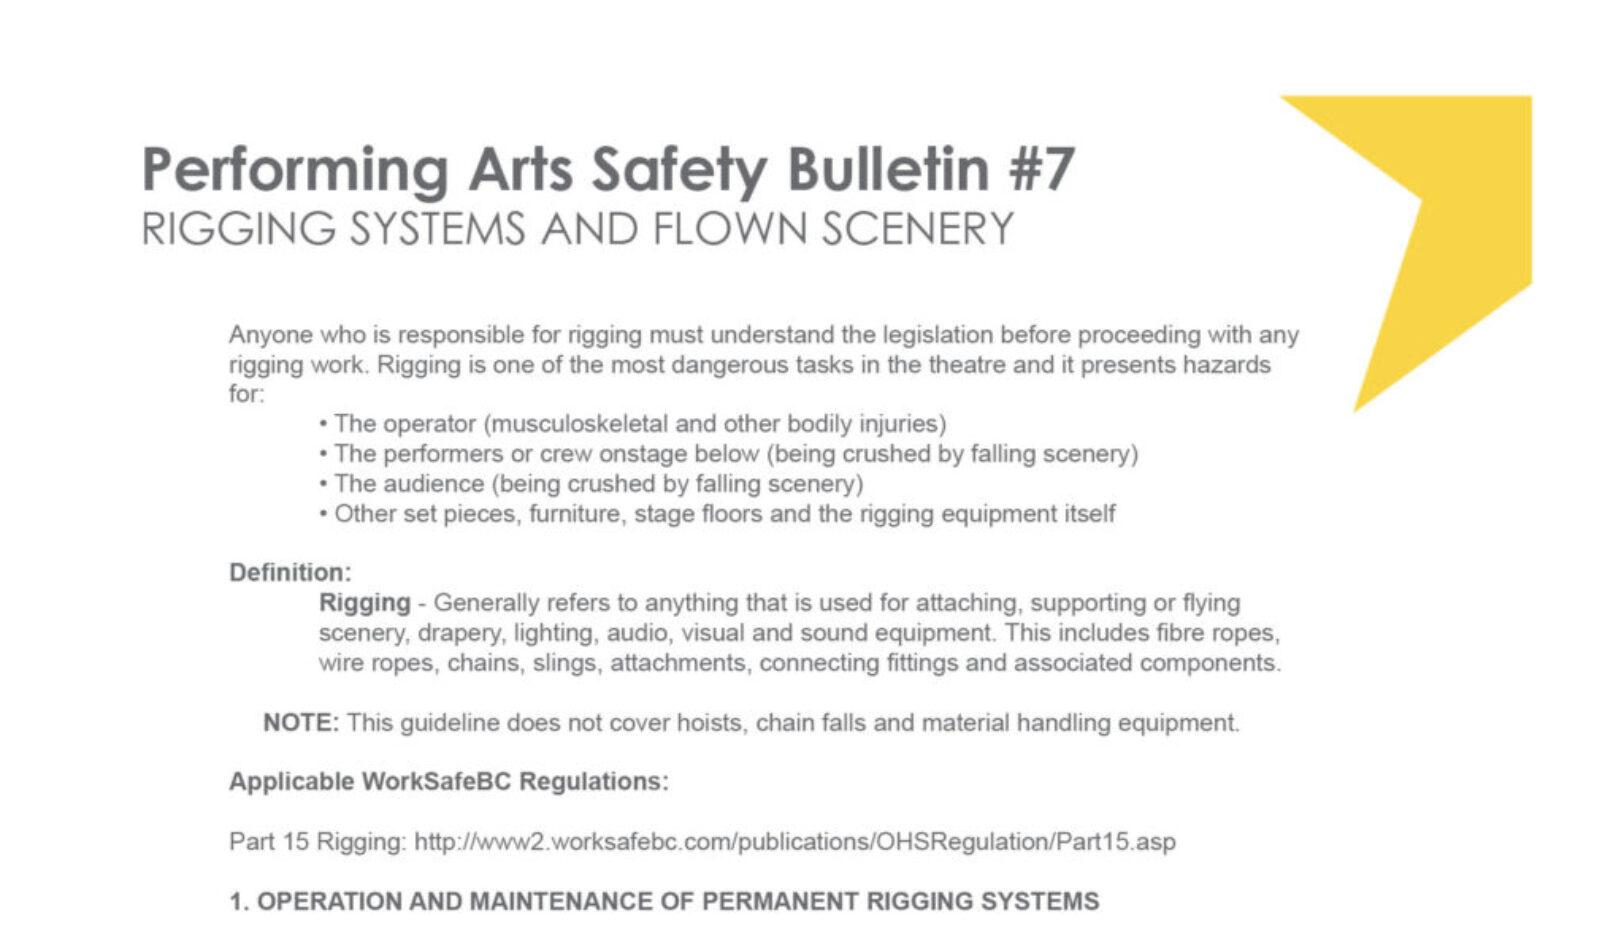 #7 Rigging Systems and Flown Scenery Performing Arts Safety Bulletin